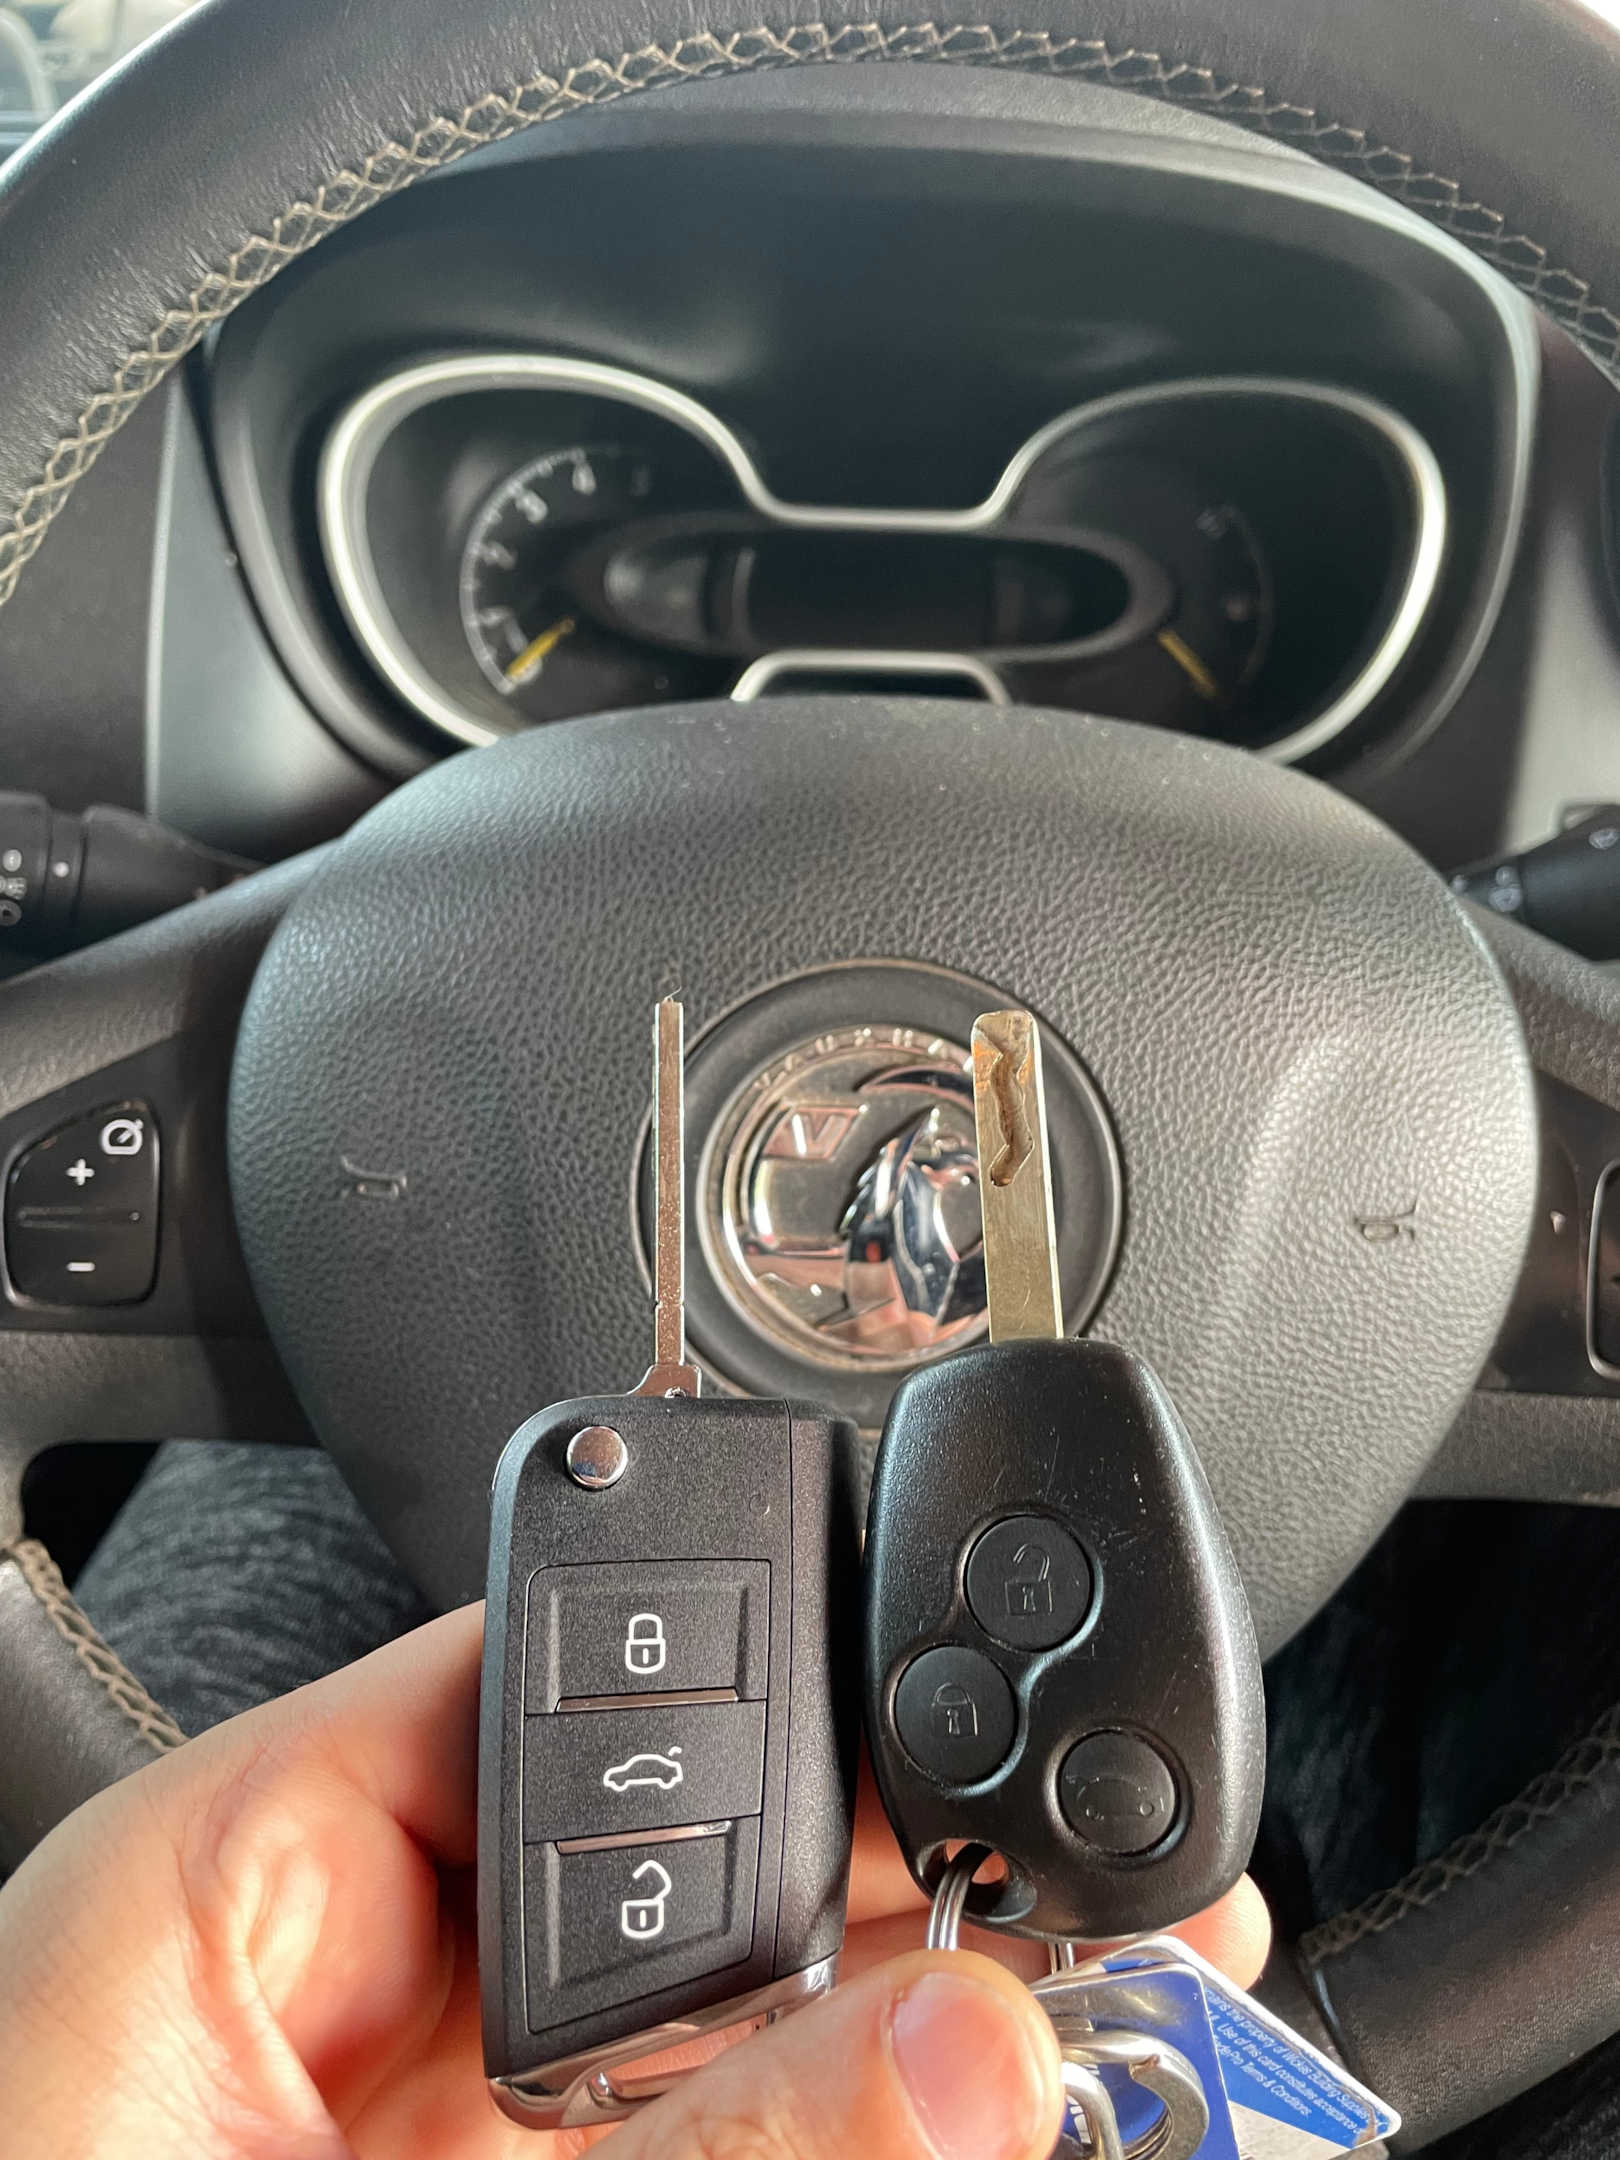 An image of a professional locksmith providing car key replacement near me service for a customer's vehicle.